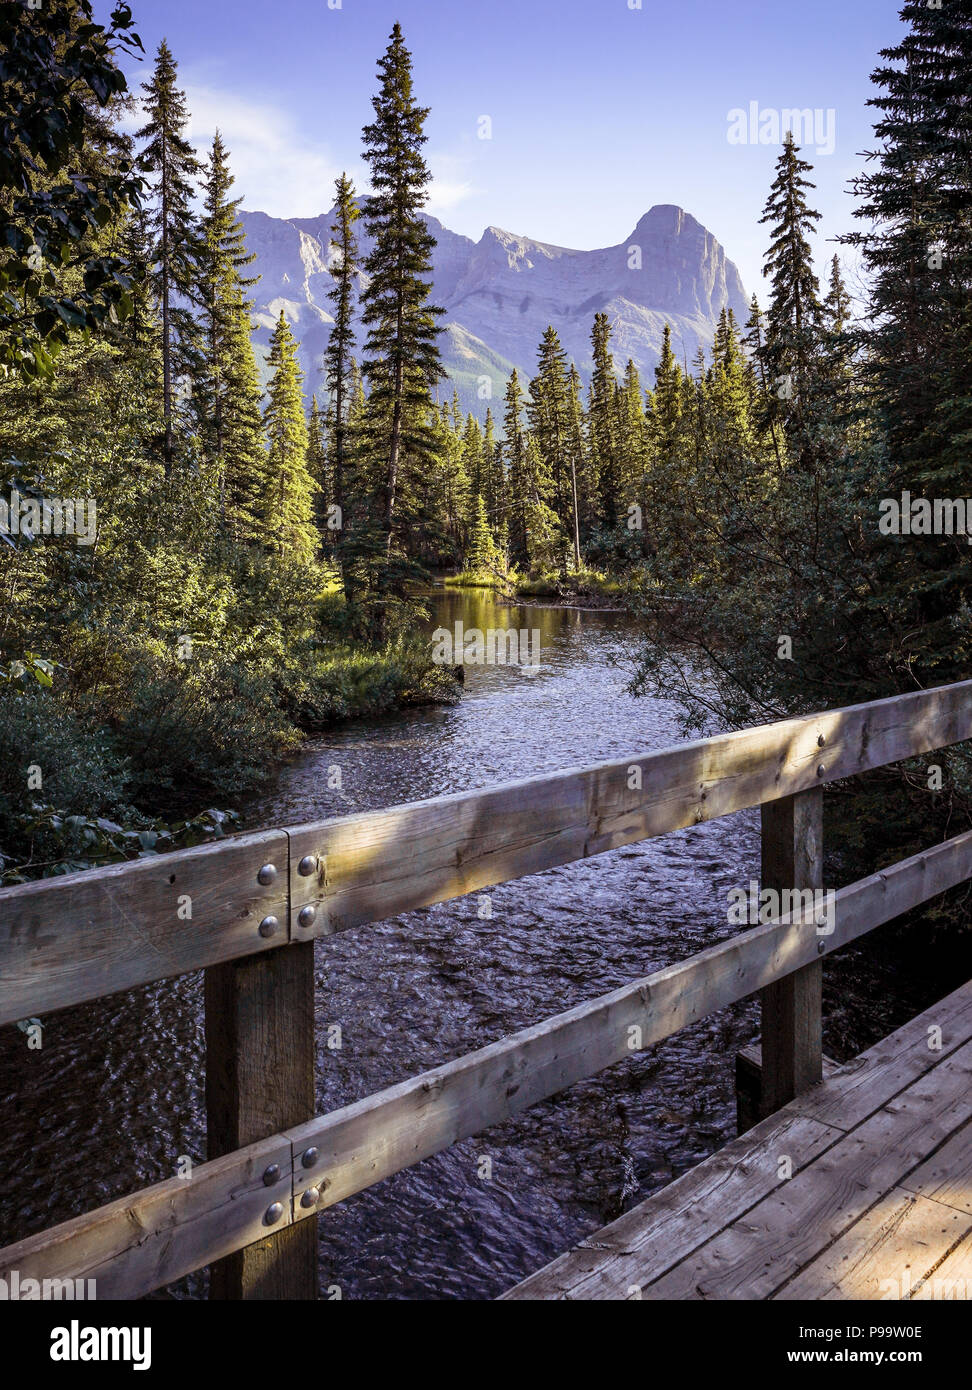 View from Bridge over creek in forest with mountains in background at sunset in Canmore Alberta Canada Stock Photo